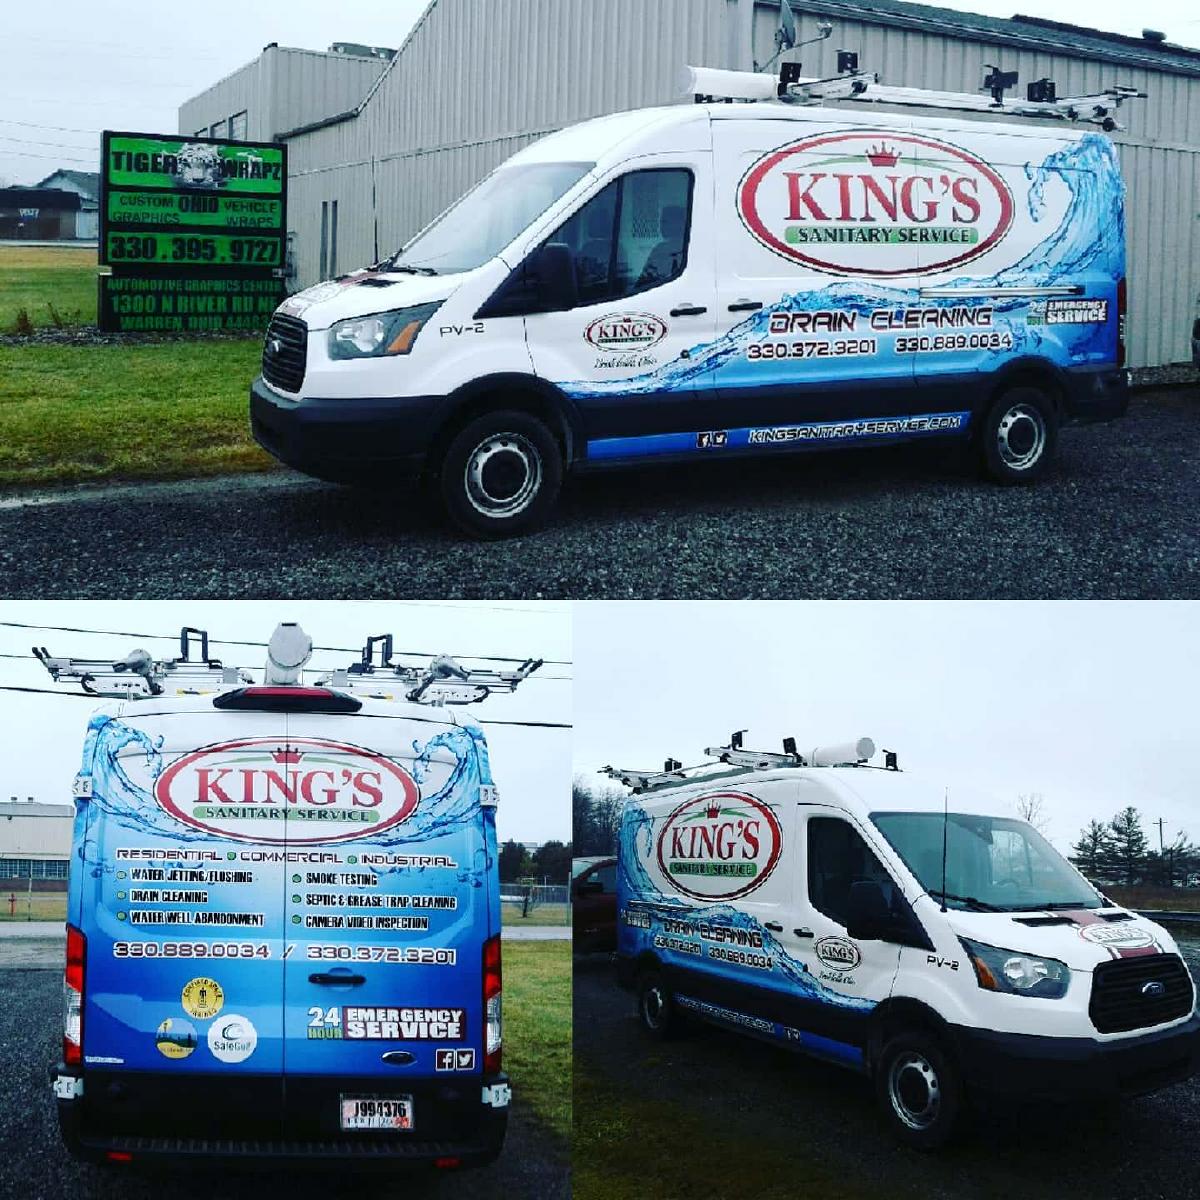 Vehicle Wraps "BEST" of Everything for 